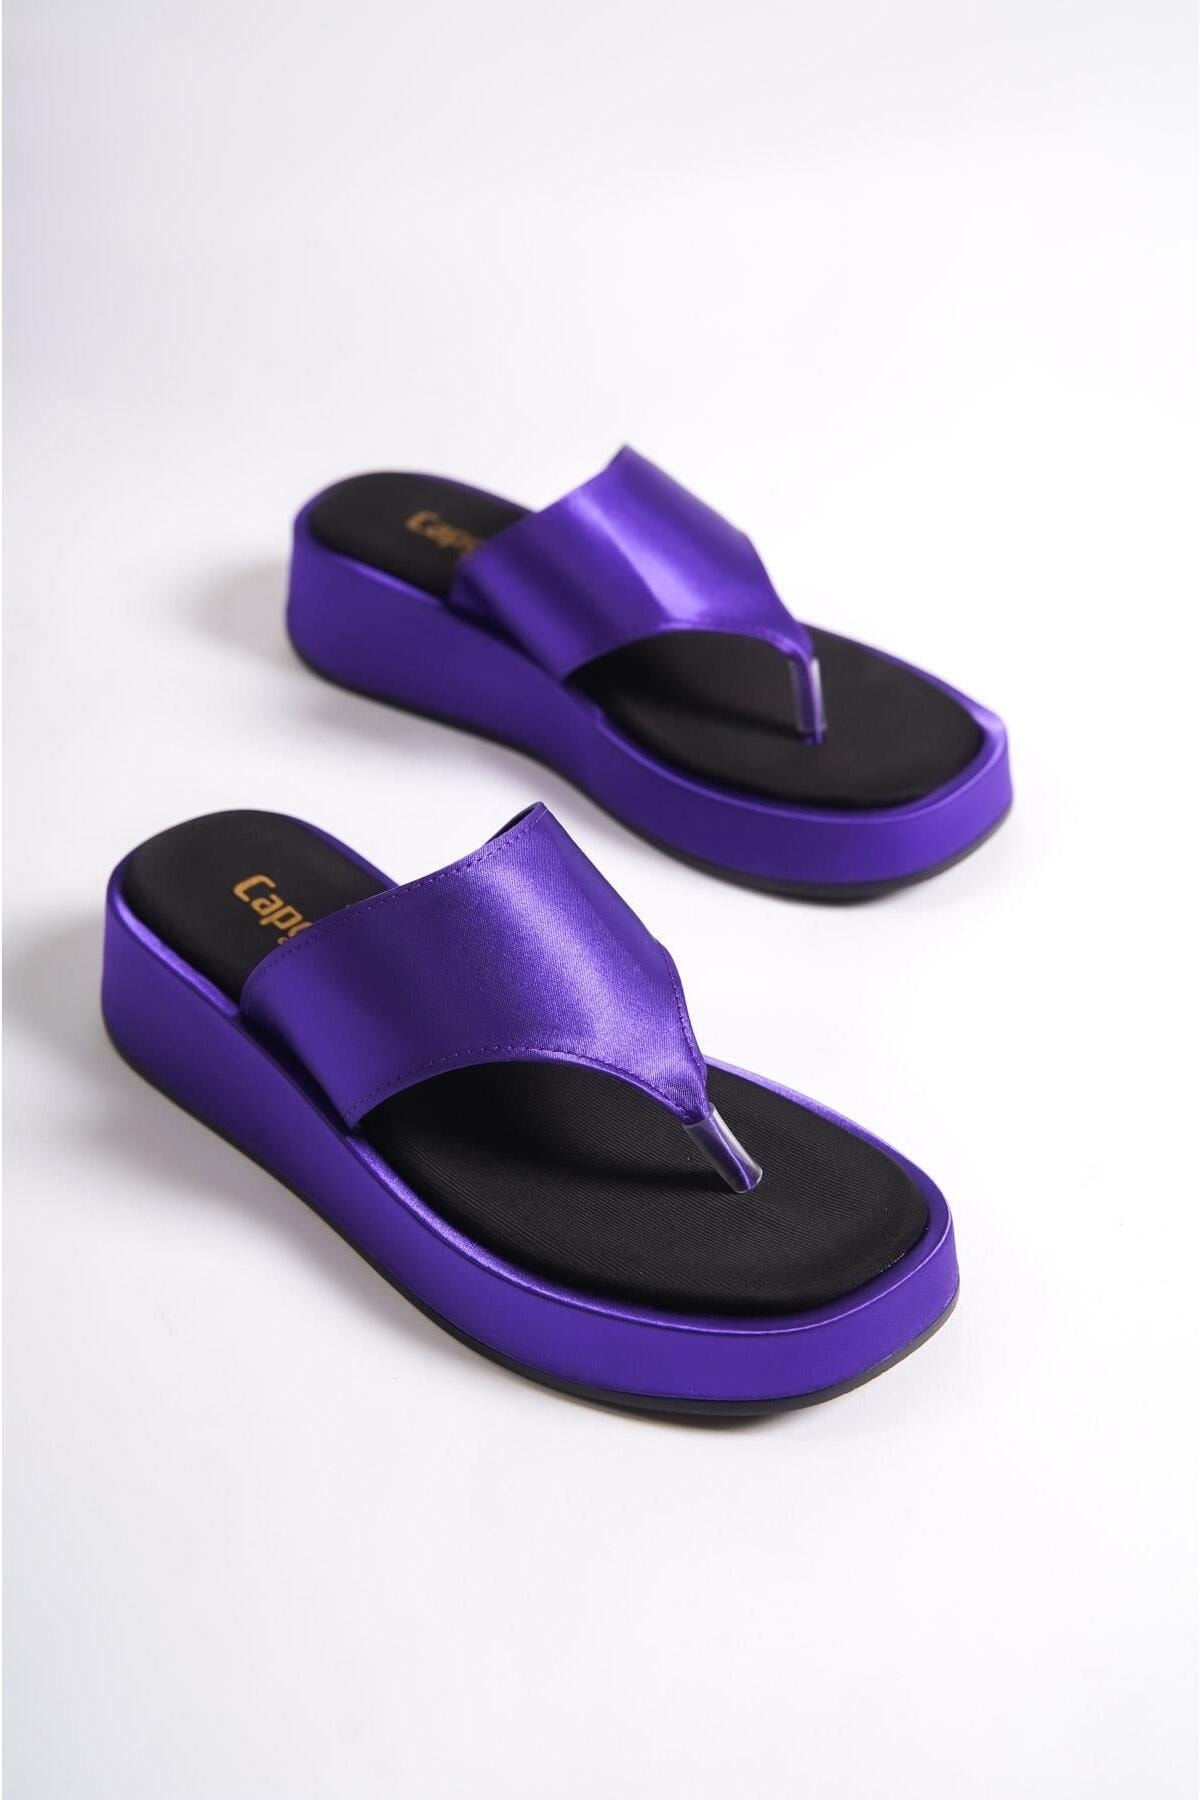 Levně Capone Outfitters Capone Flat Heeled Flip-Flops Comfort Satin Fashion Lilac Women's Slippers.